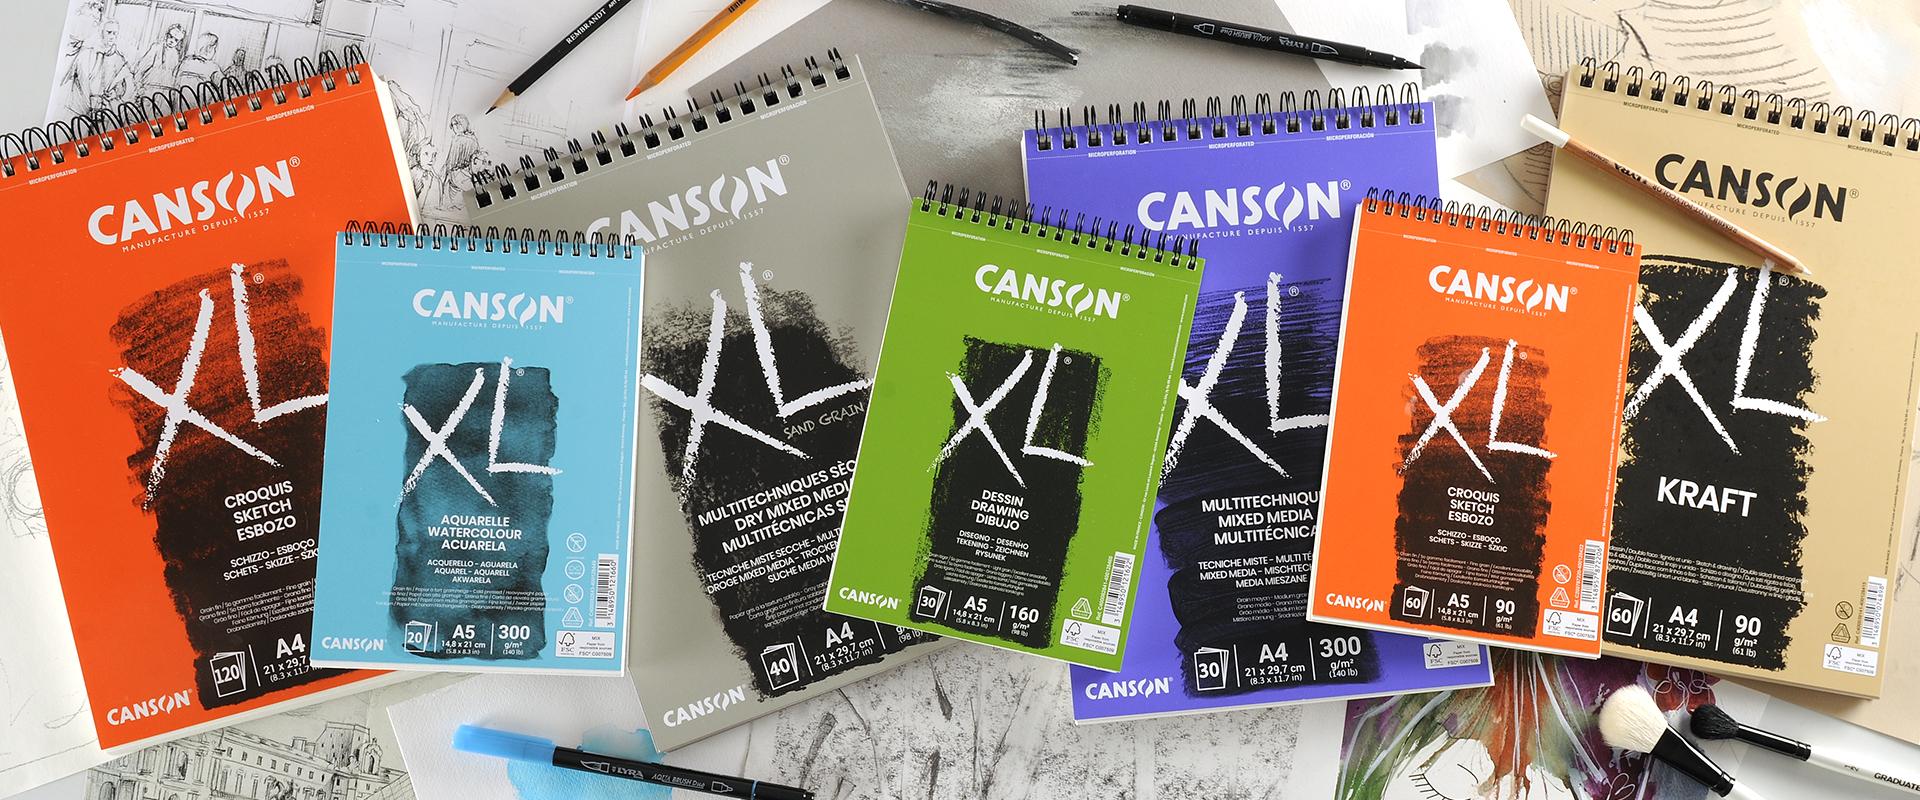  Canson XL Series Mix Paper Pad, Heavyweight, Fine Texture,  Heavy Sizing for Wet and Dry Media, Side Wire Bound, 98 Pound, 14 x 17 in,  60 Sheets, 14X17, 0 : Arts, Crafts & Sewing